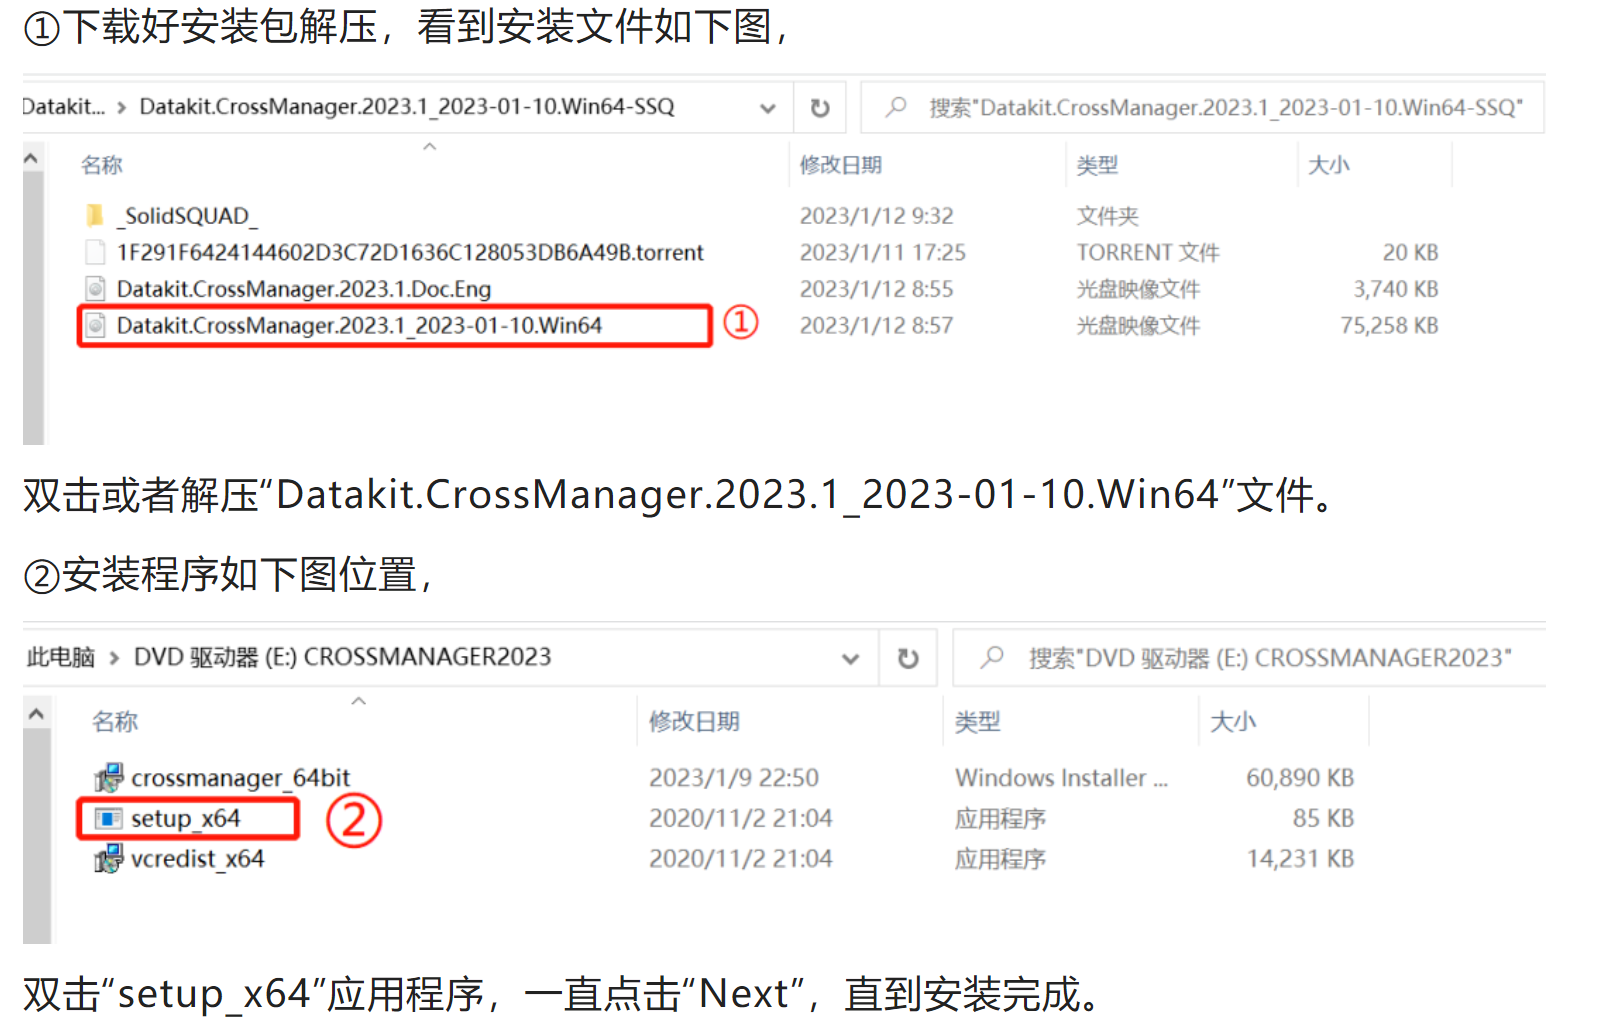 DATAKIT CrossManager 2023.3 download the new for windows